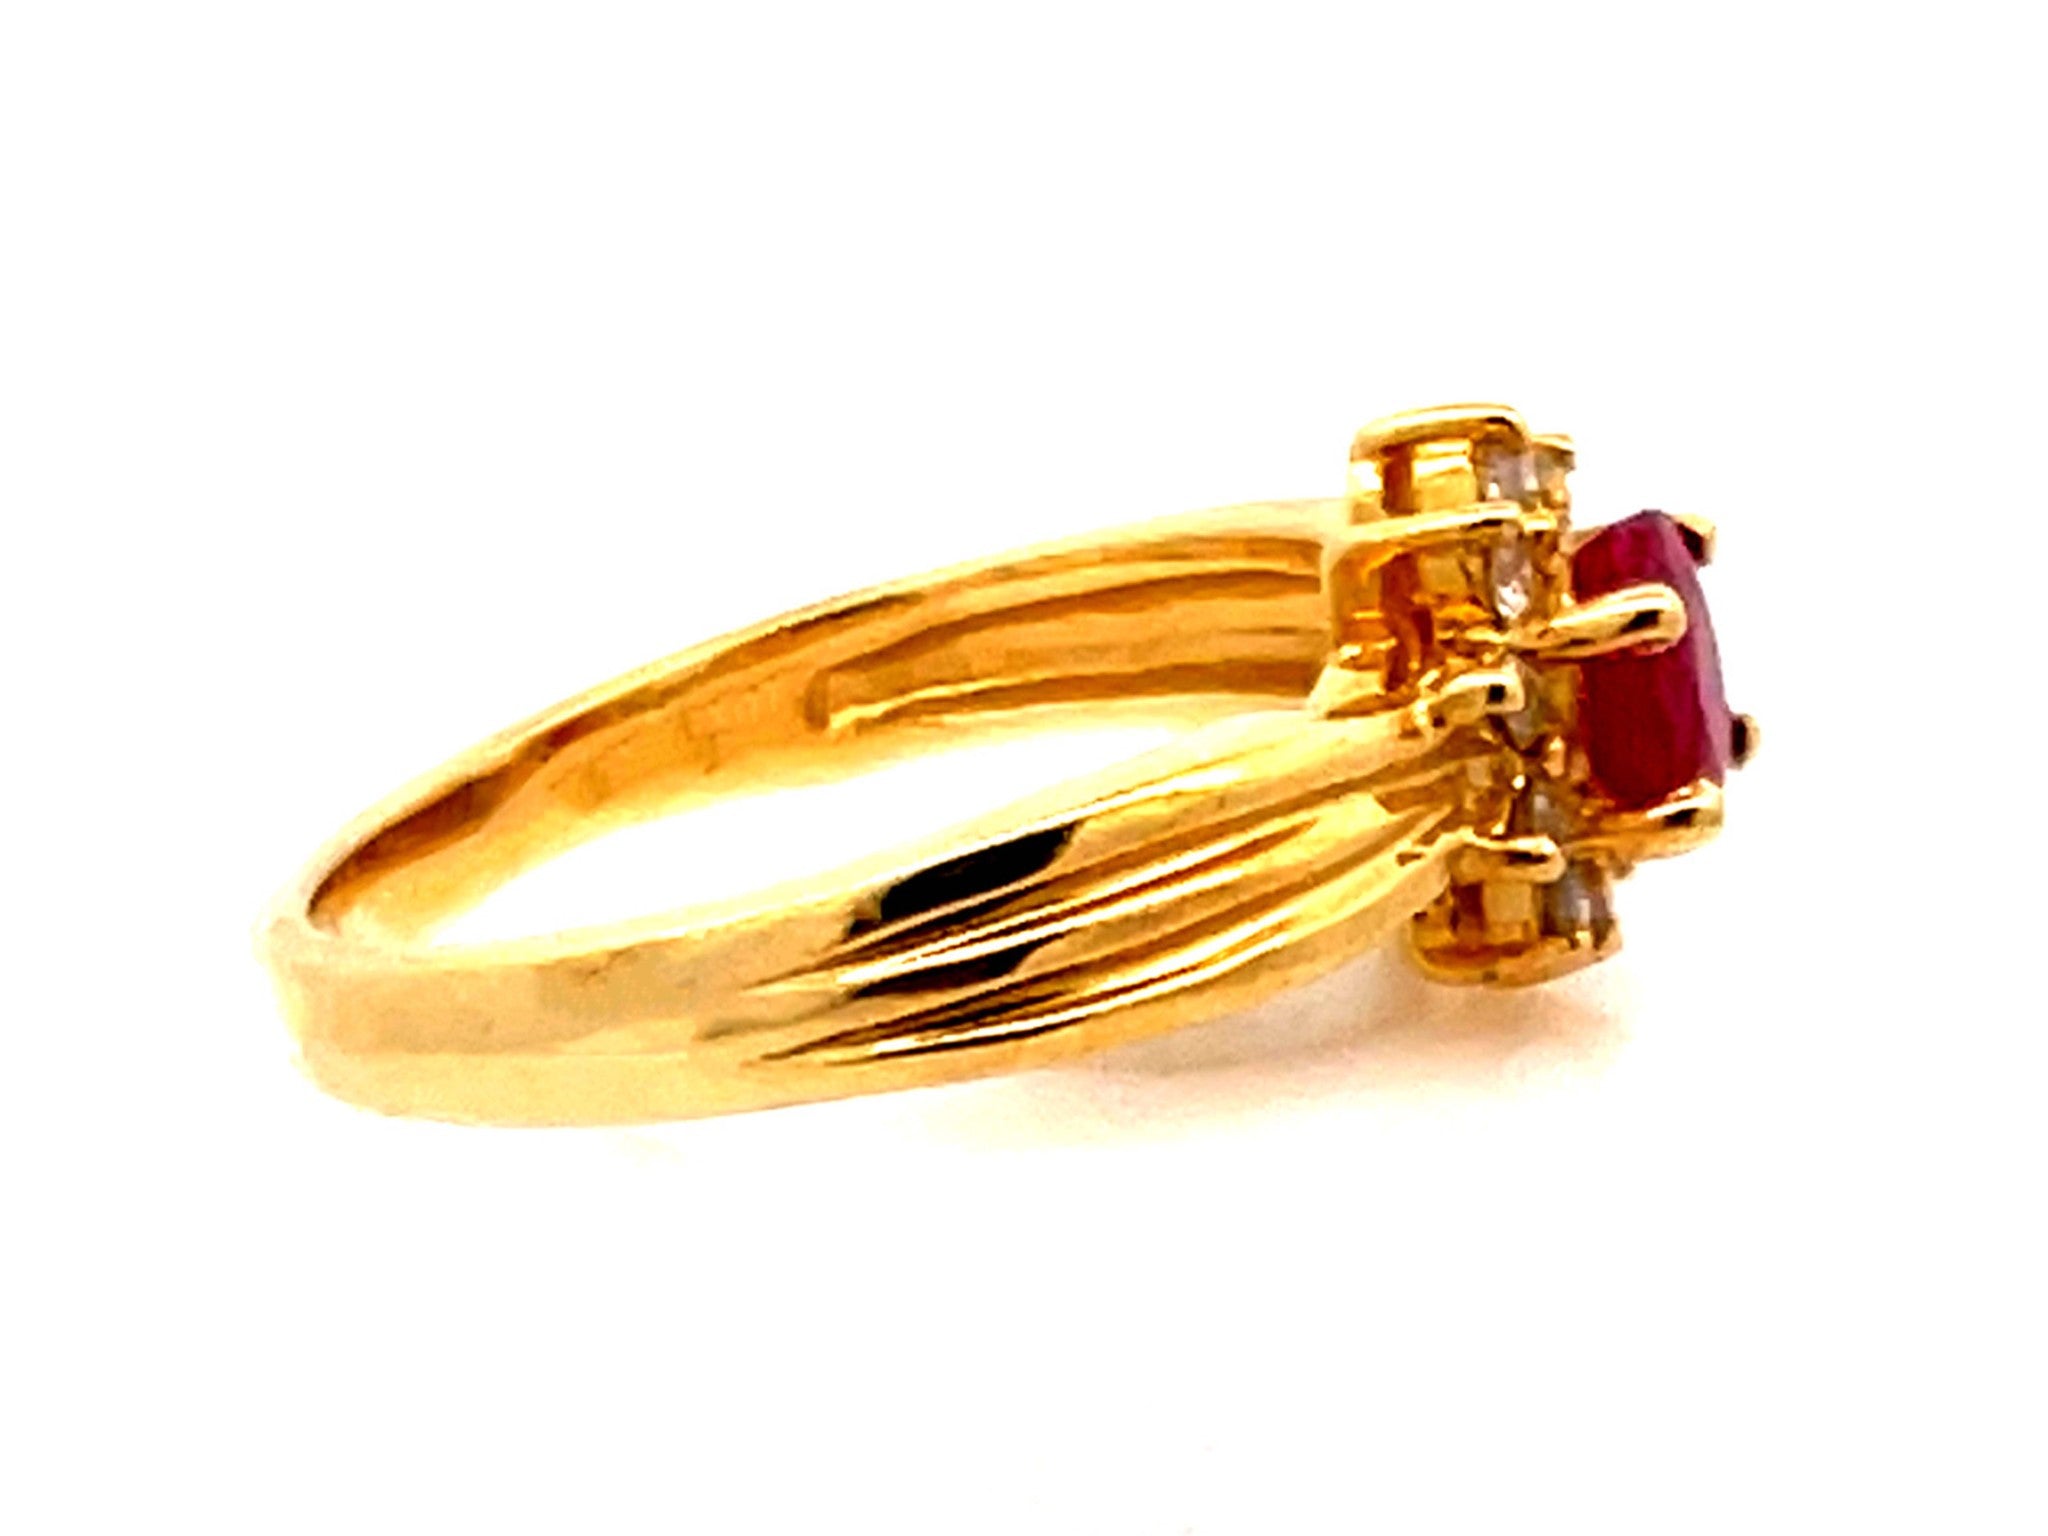 Vintage Ruby and Diamond Flower Ring in 14k Yellow Gold